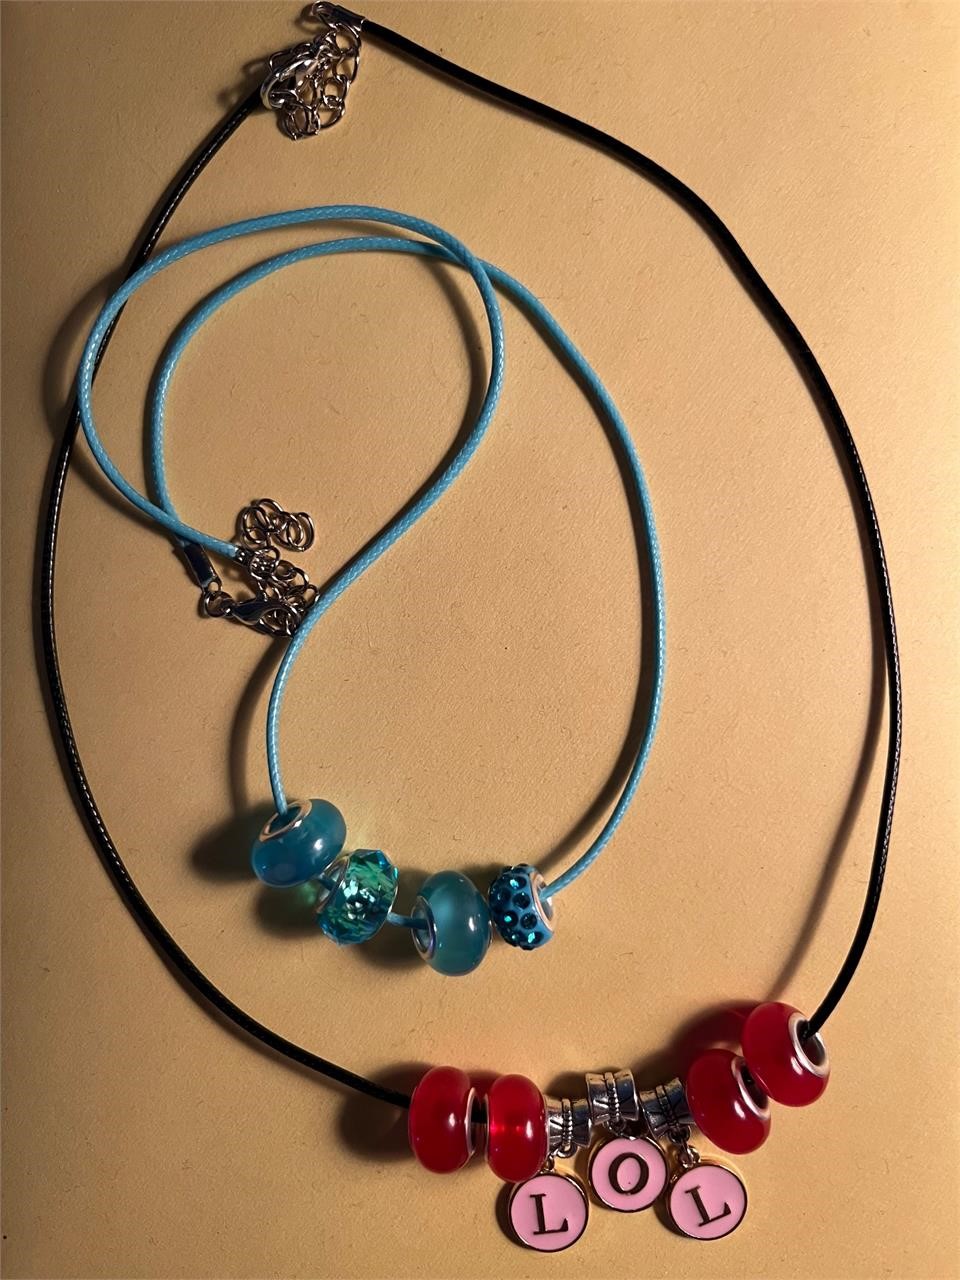 2 Necklaces made by 7 year old Client